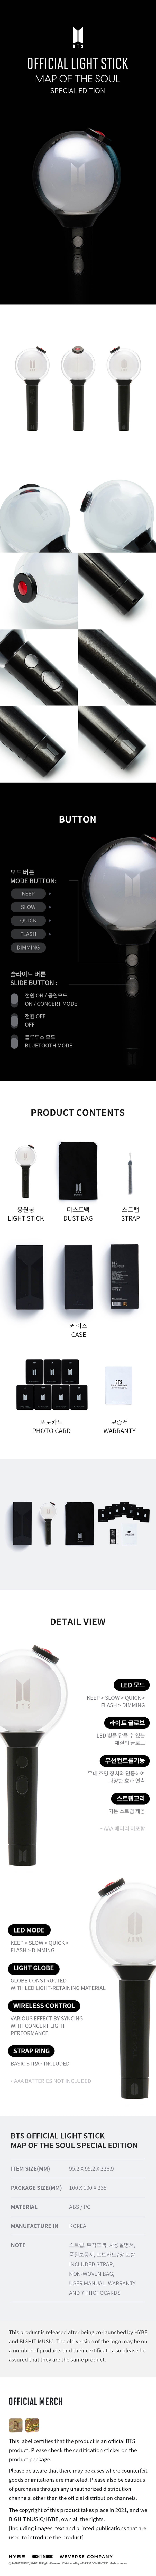 Cheap BTS : Official Light Stick - Army Bomb 3 [MAP OF THE SOUL] Special  Edition